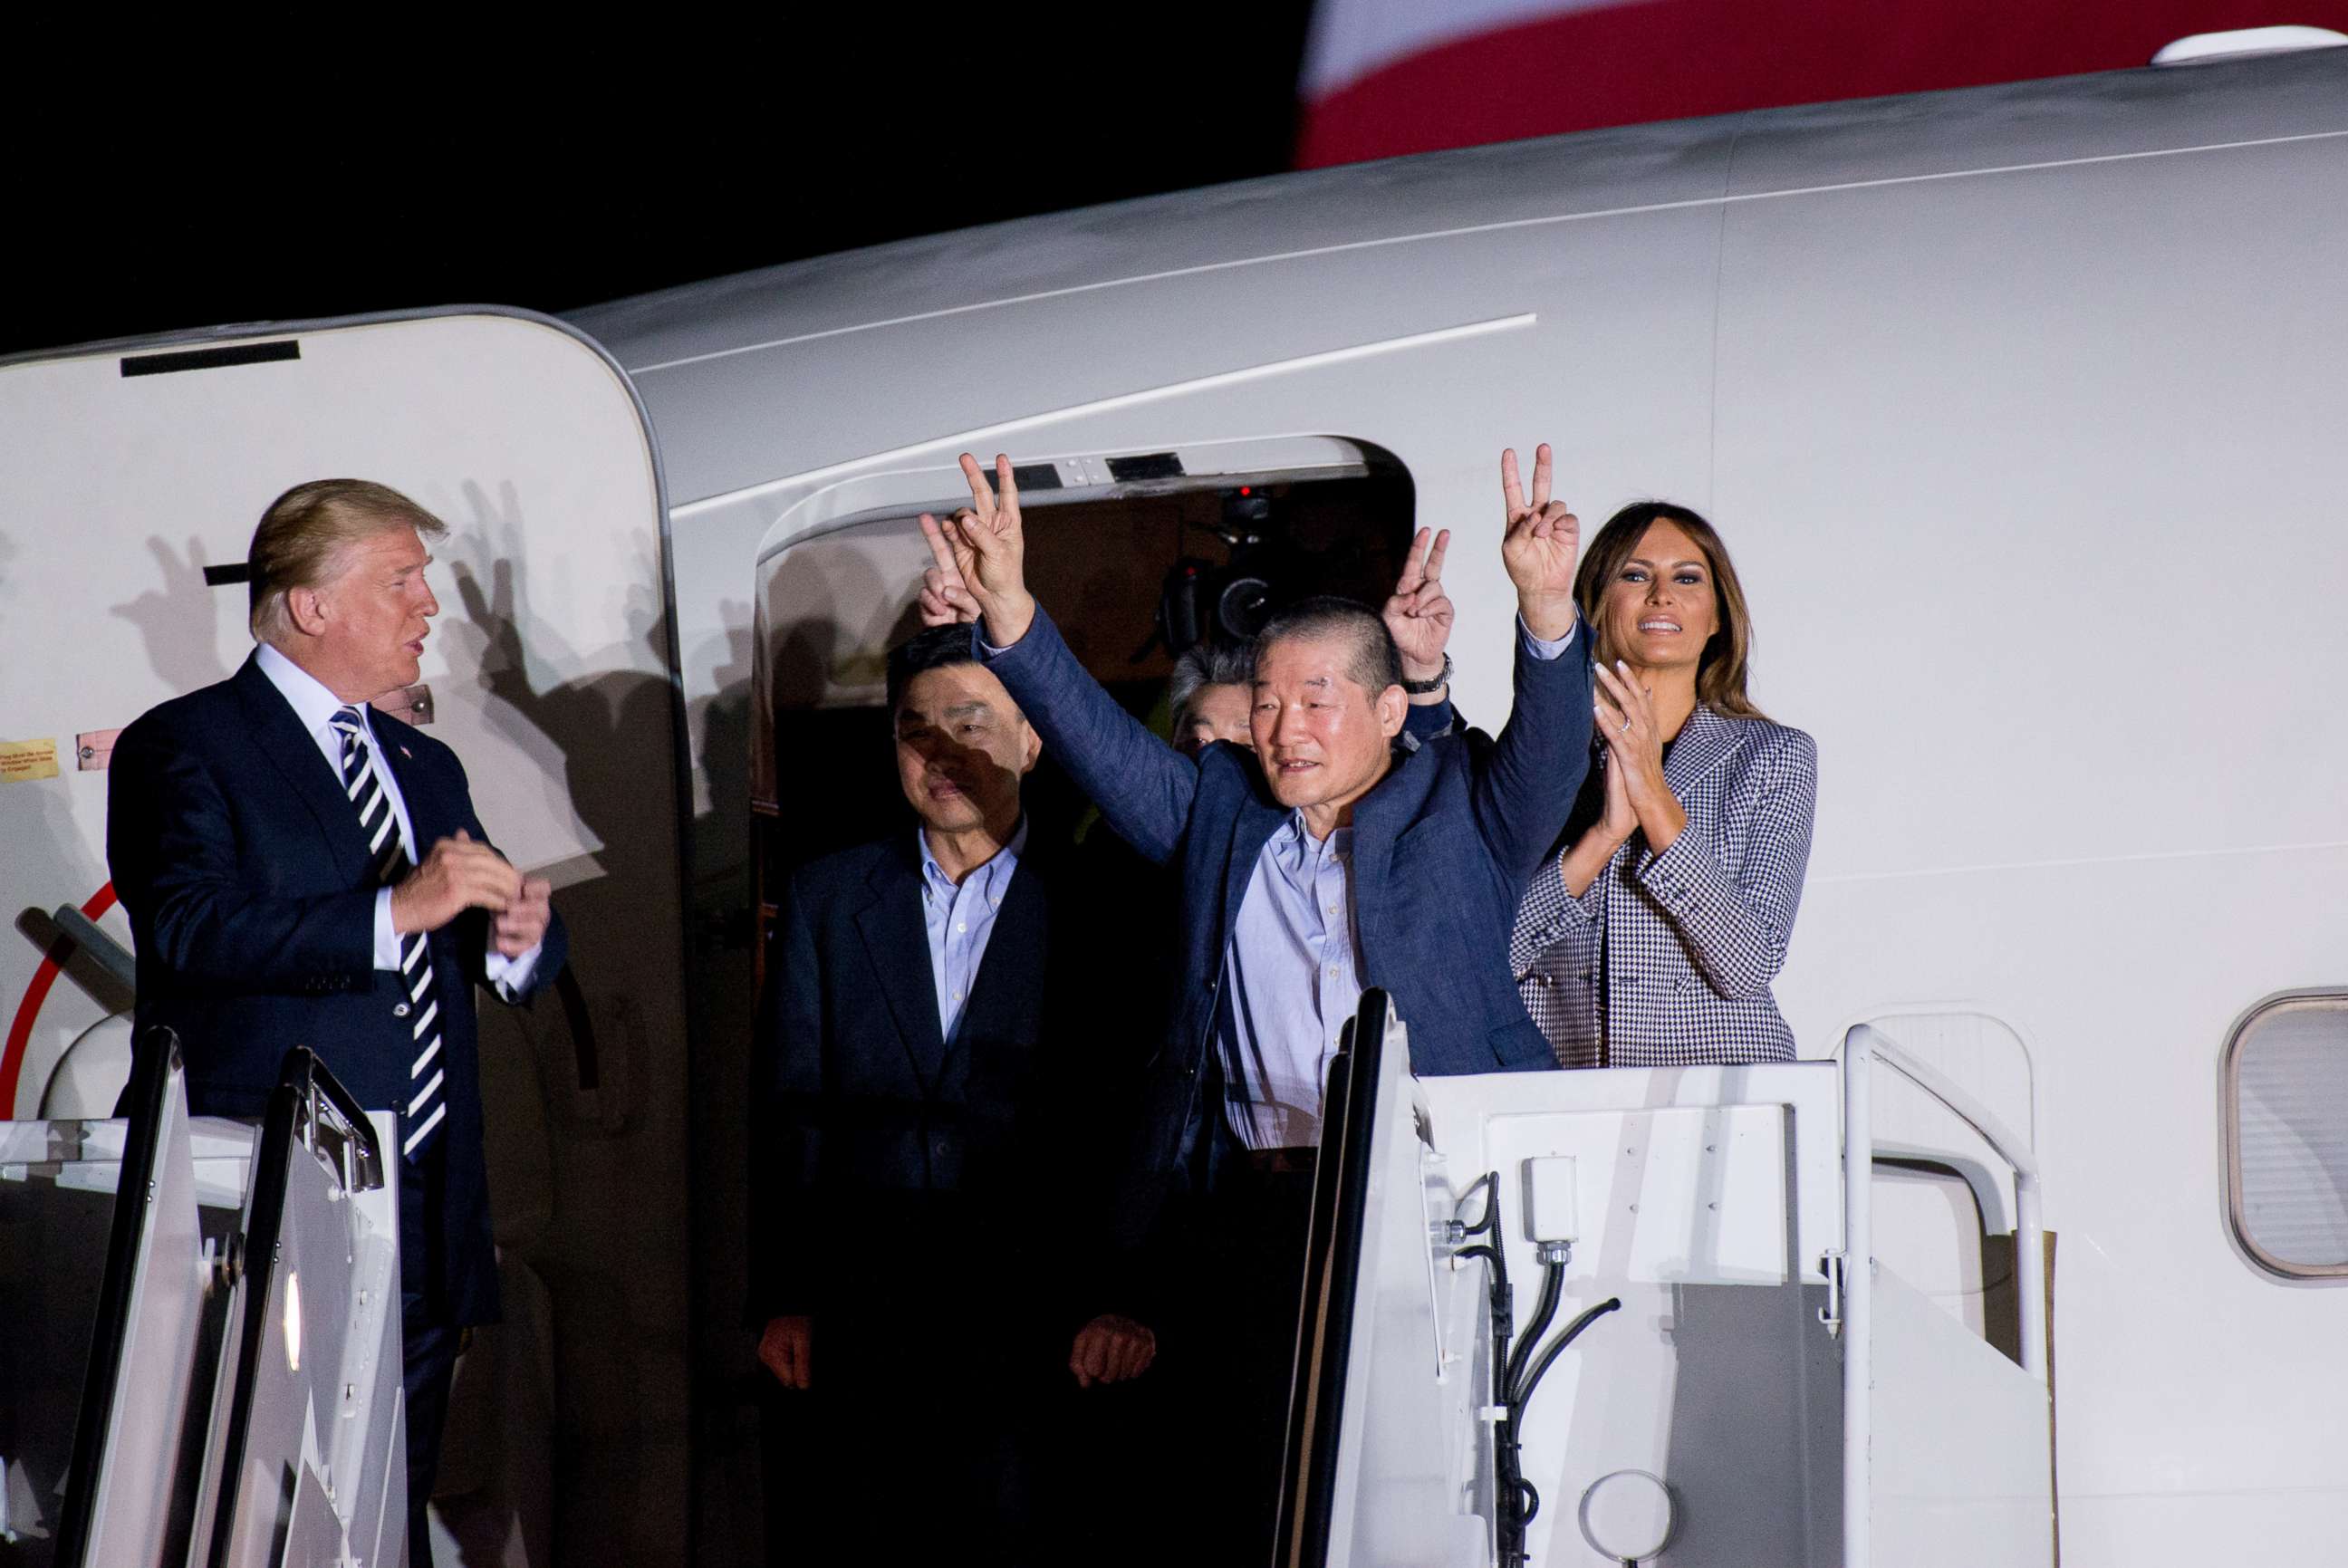 PHOTO: The three American citizens freed from North Korea are welcomed back to the U.S. by President Donald Trump and Melania, Vice President Mike Pence and Karen, and Secretary of State Mike Pompeo at Joint Base Andrews, May 10, 2018.